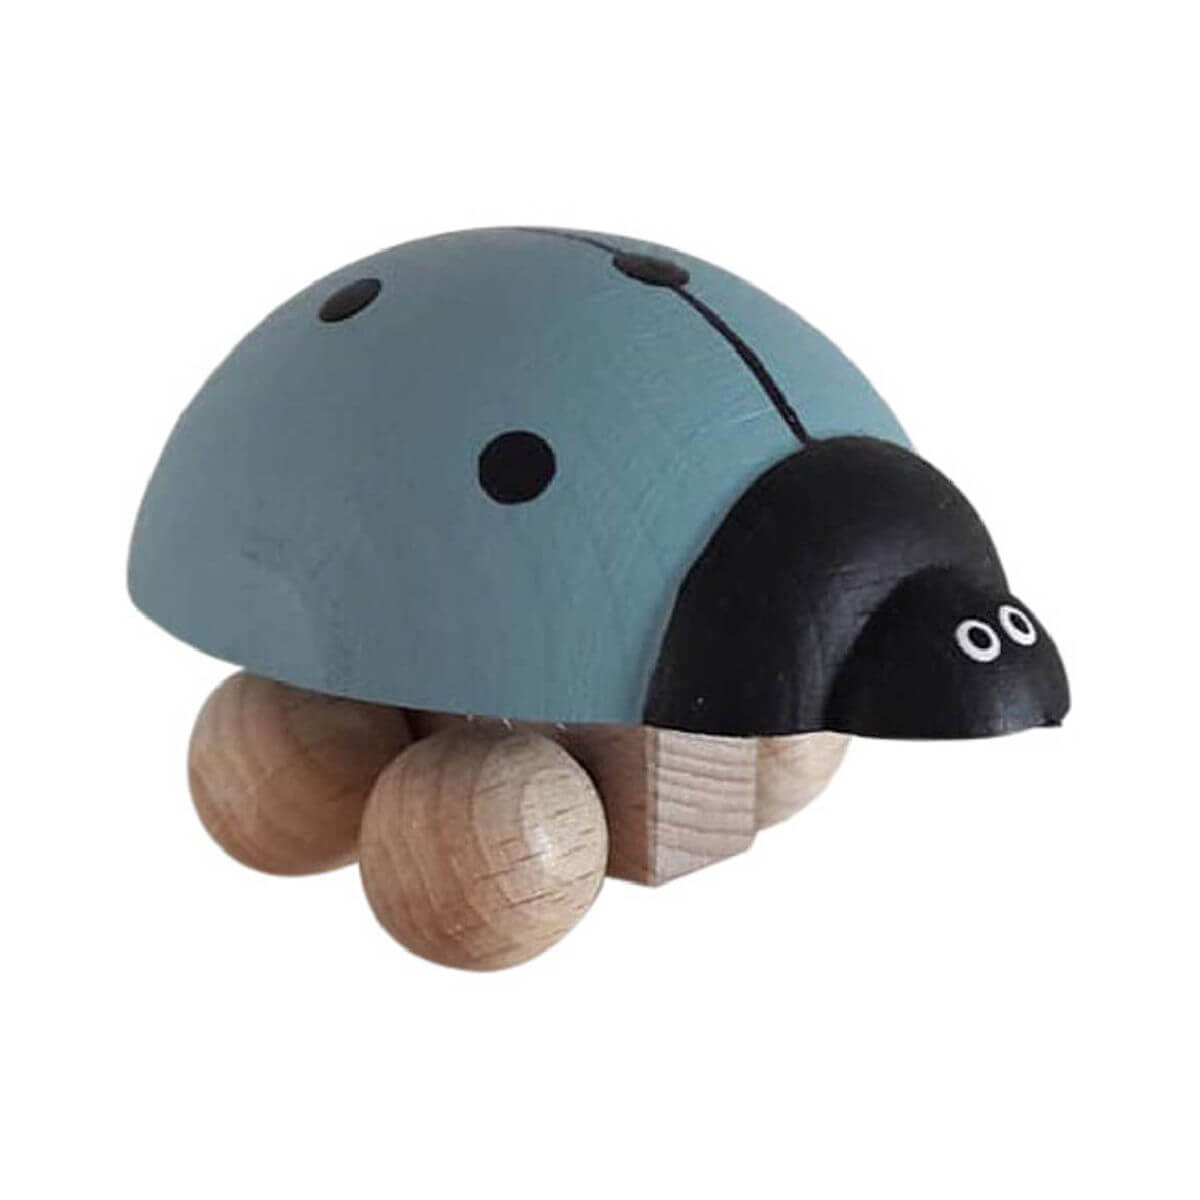 othat wooden push along toy ladybird in blue